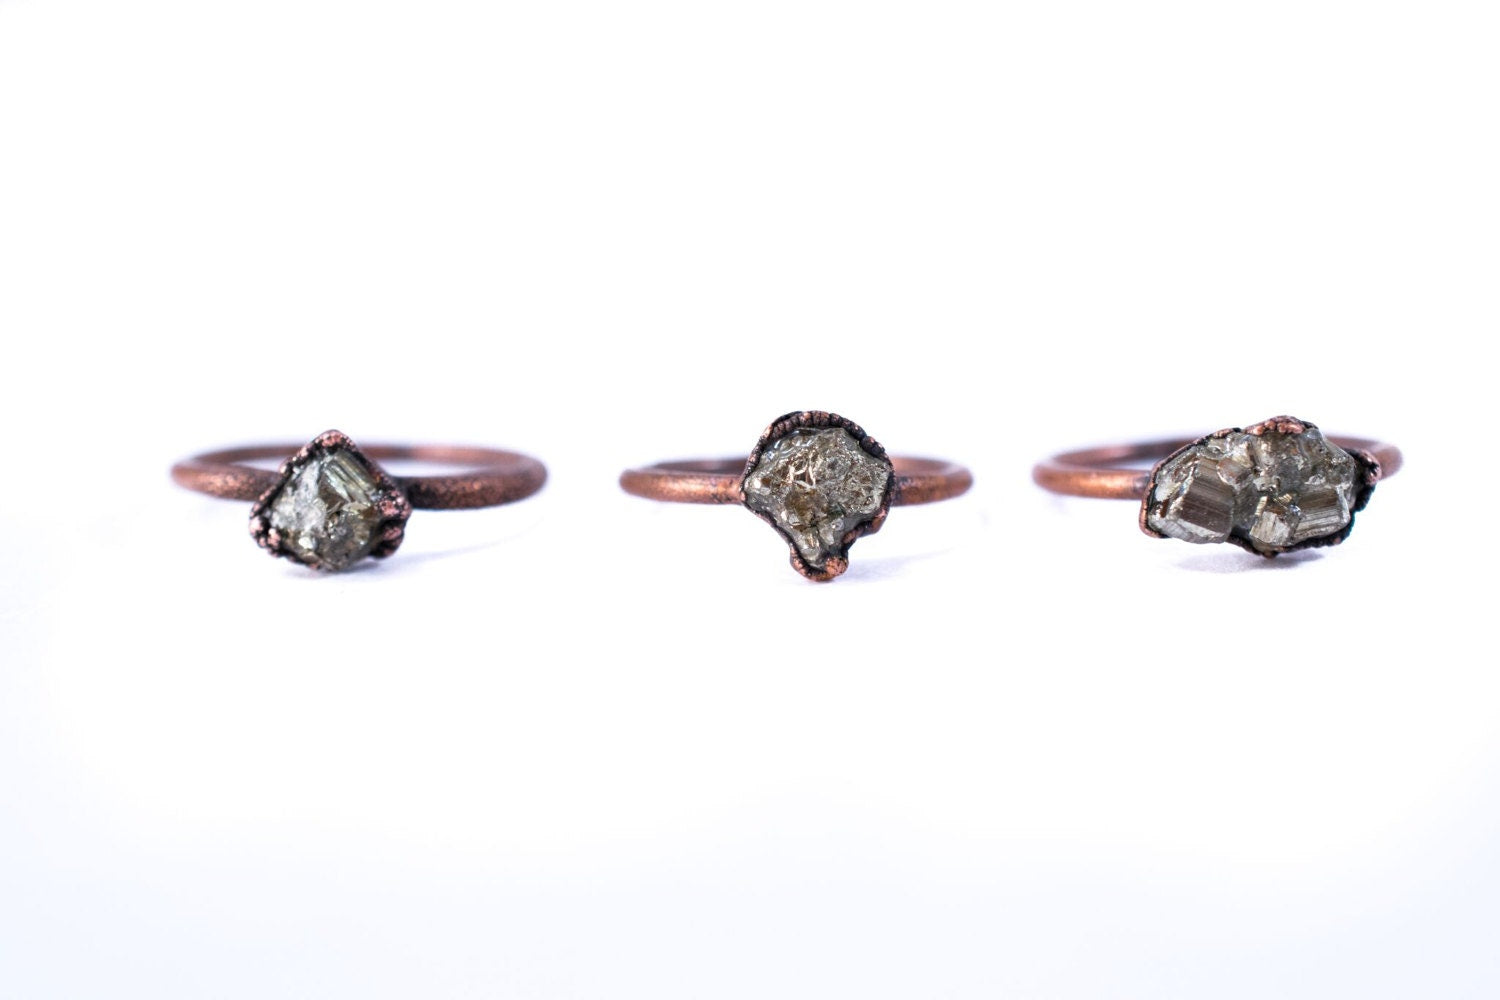 Raw pyrite ring | Fool's gold jewelry